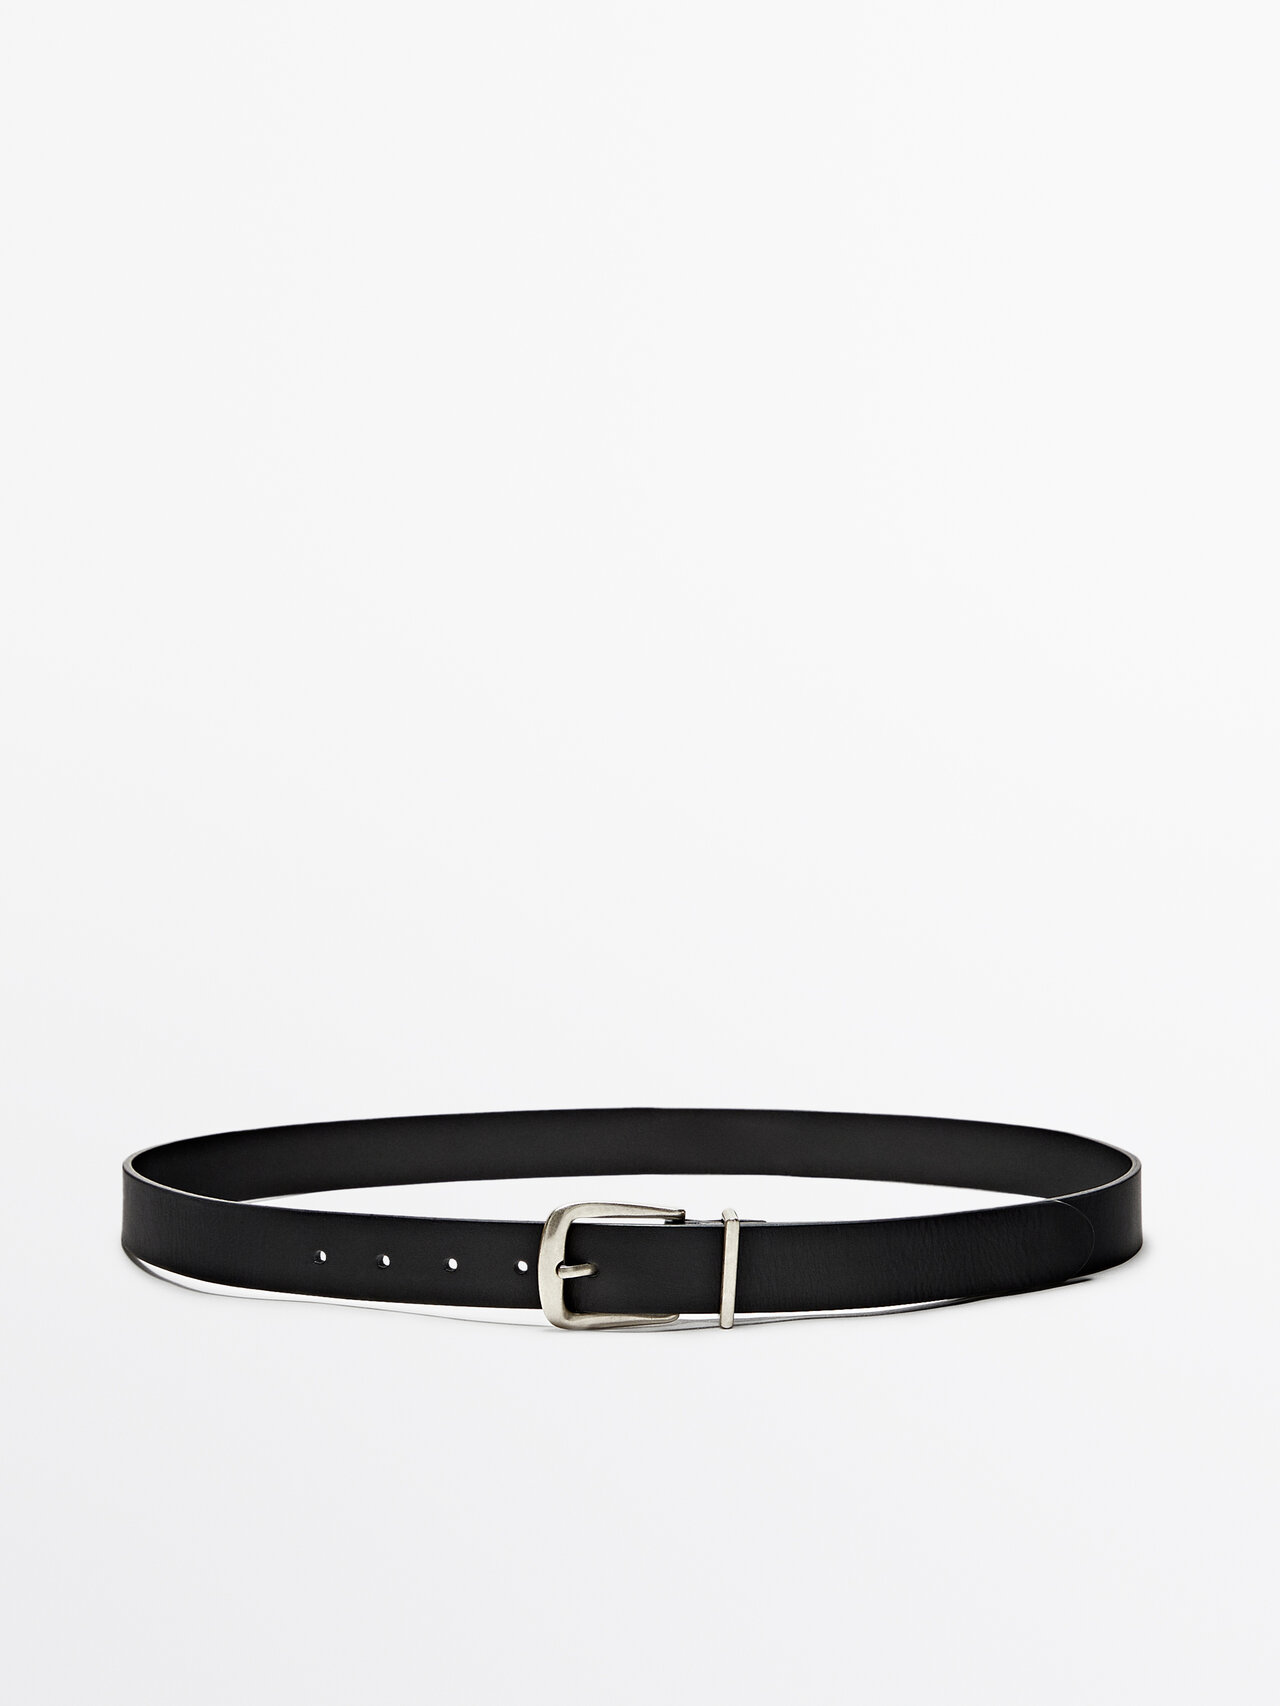 Massimo Dutti Leather Belt With Metal Loop In Black